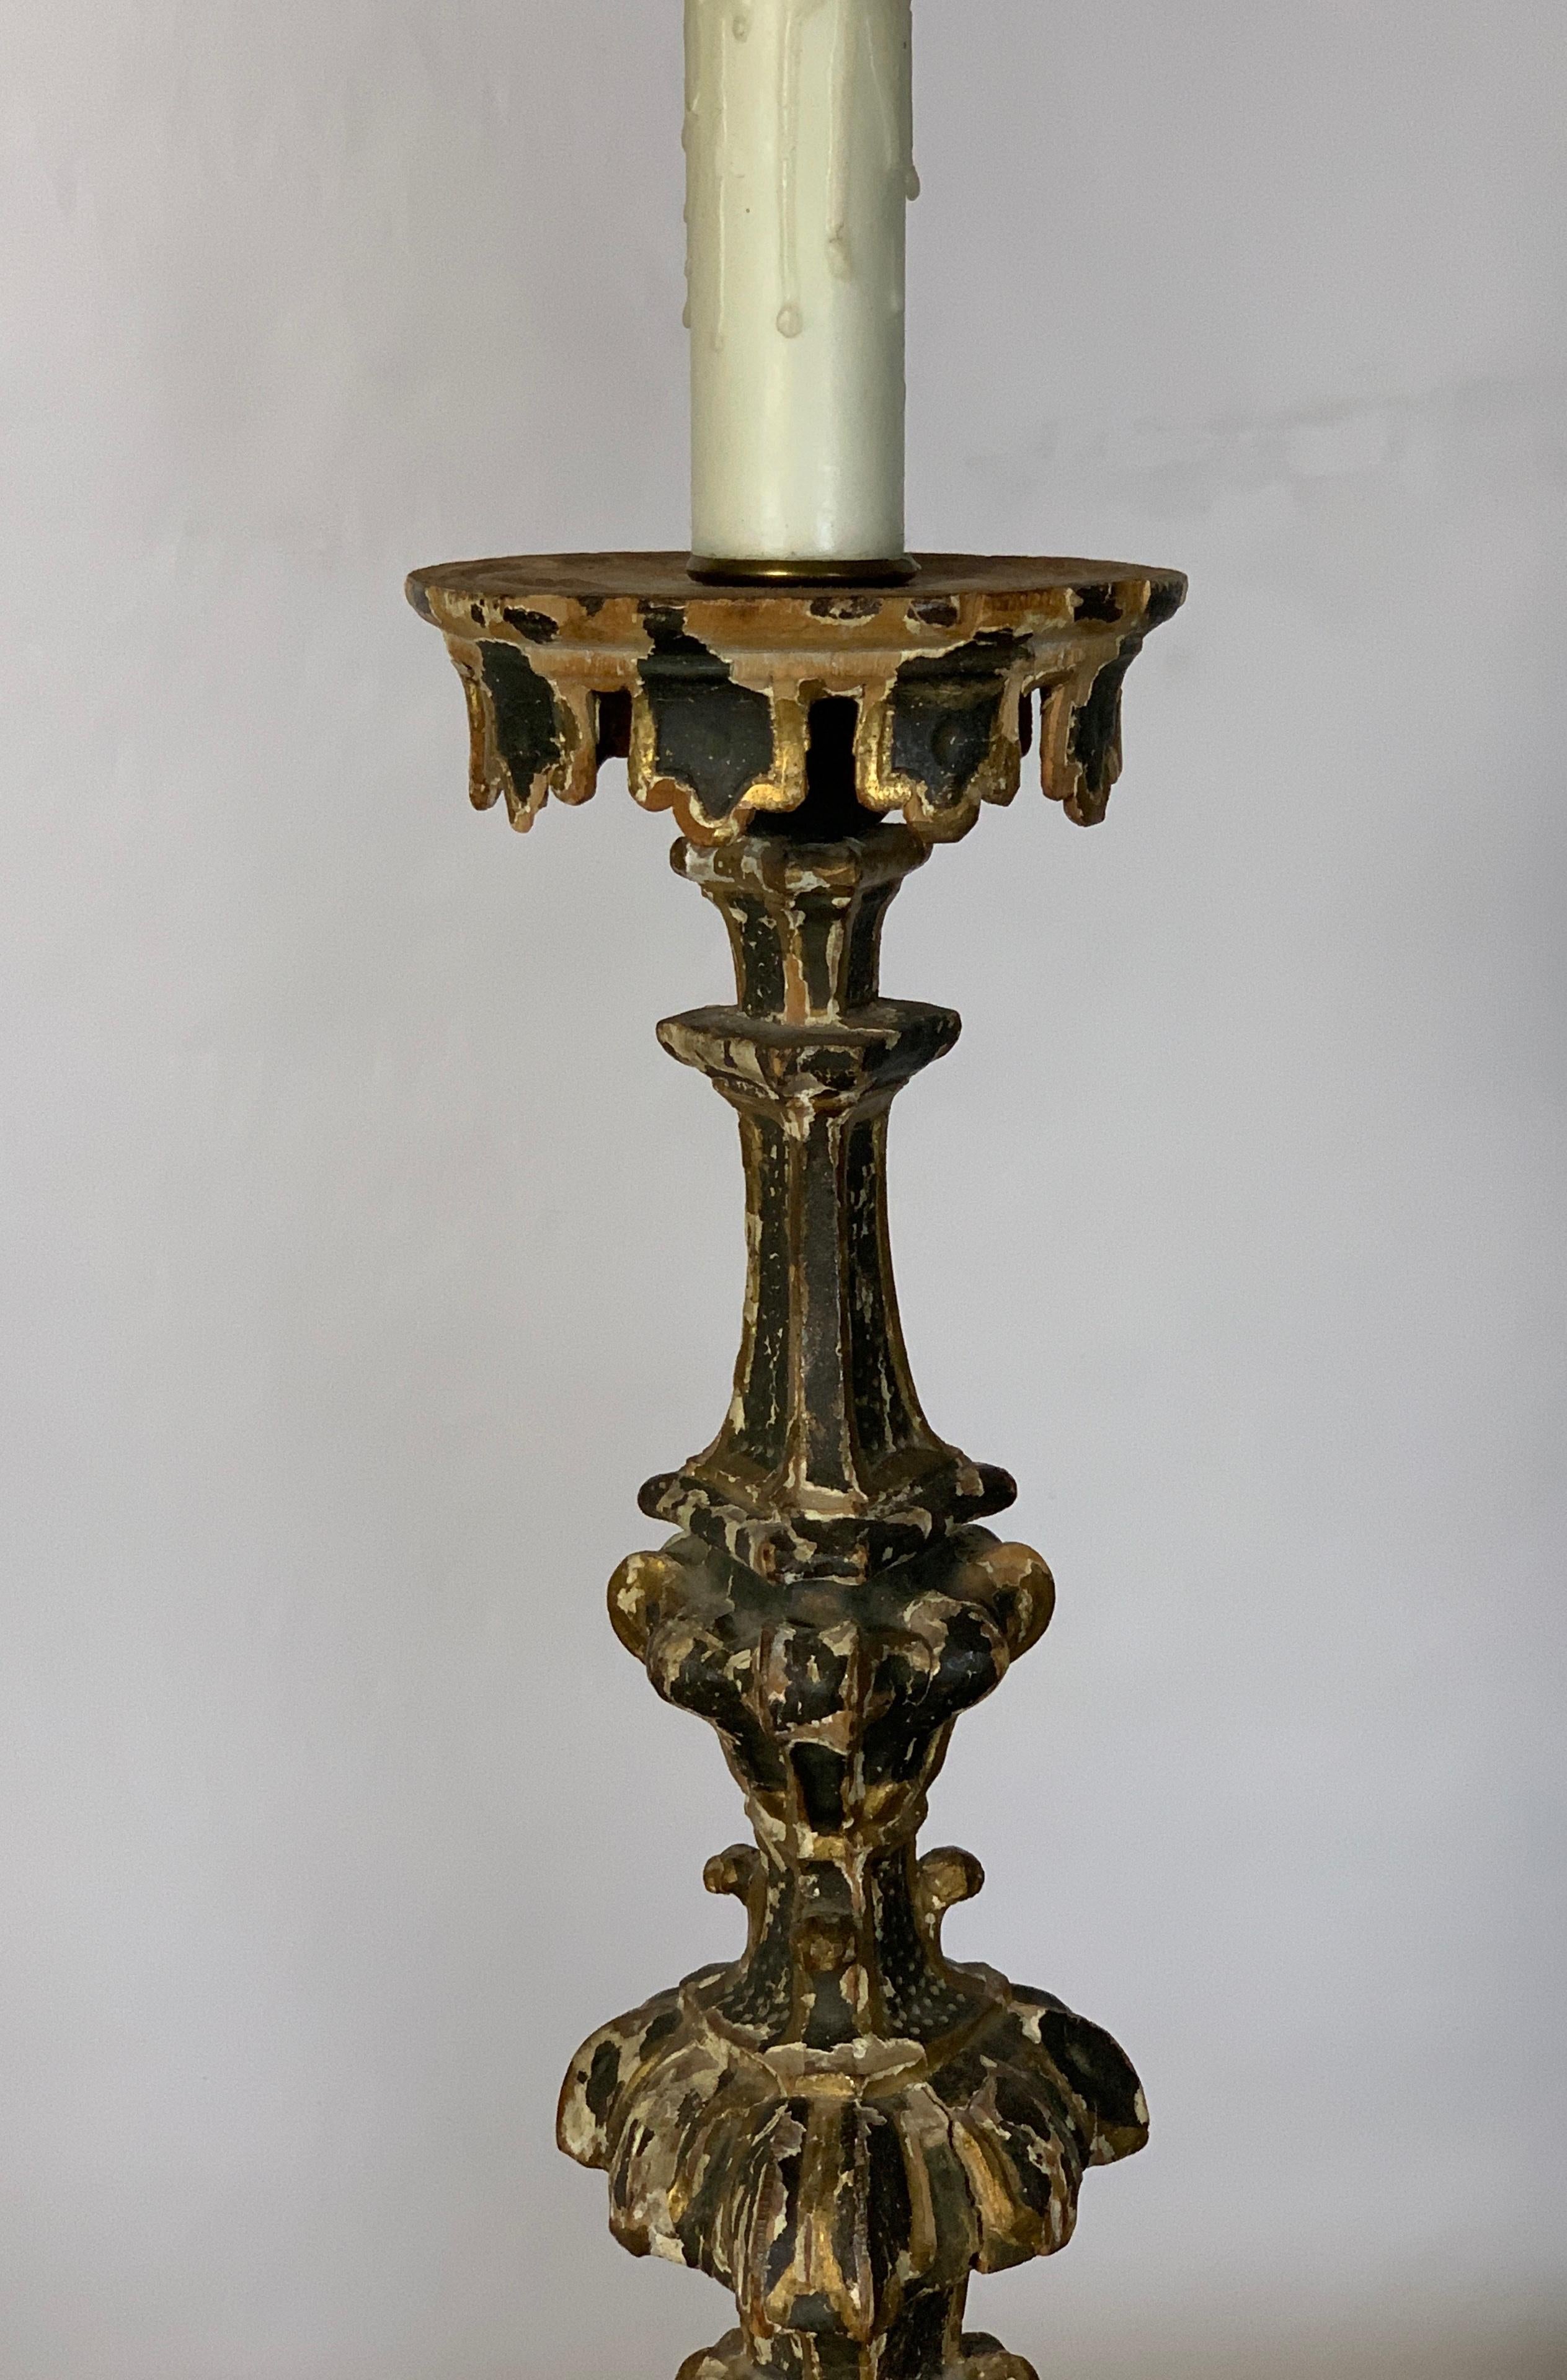 Wood Pair of 18th Century Italian Pricket Candlestick Lamps